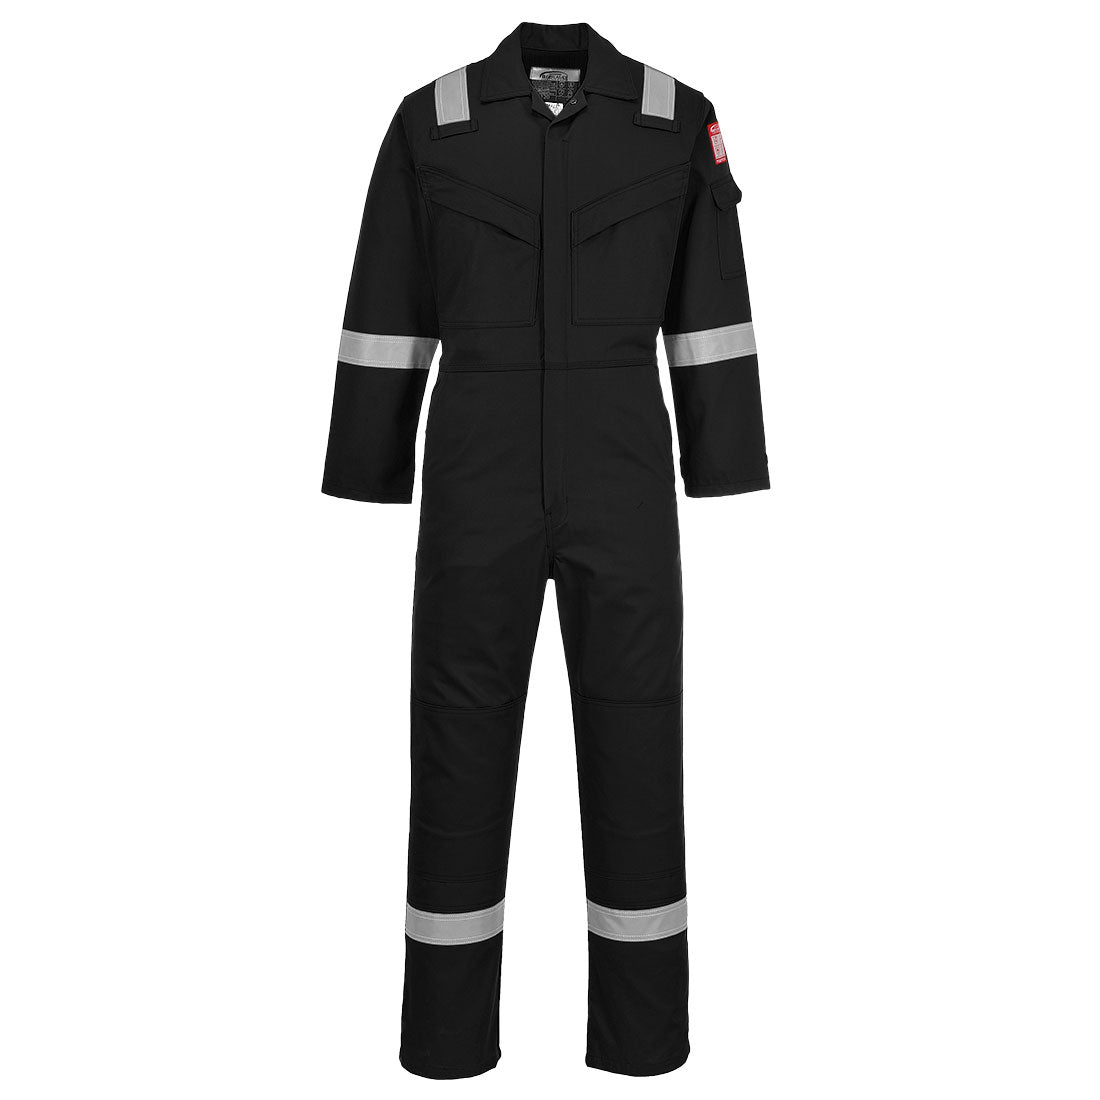 Portwest FR50 Black Sz M Regular Flame Resistant Anti-Static Boiler Suit Coverall Overall